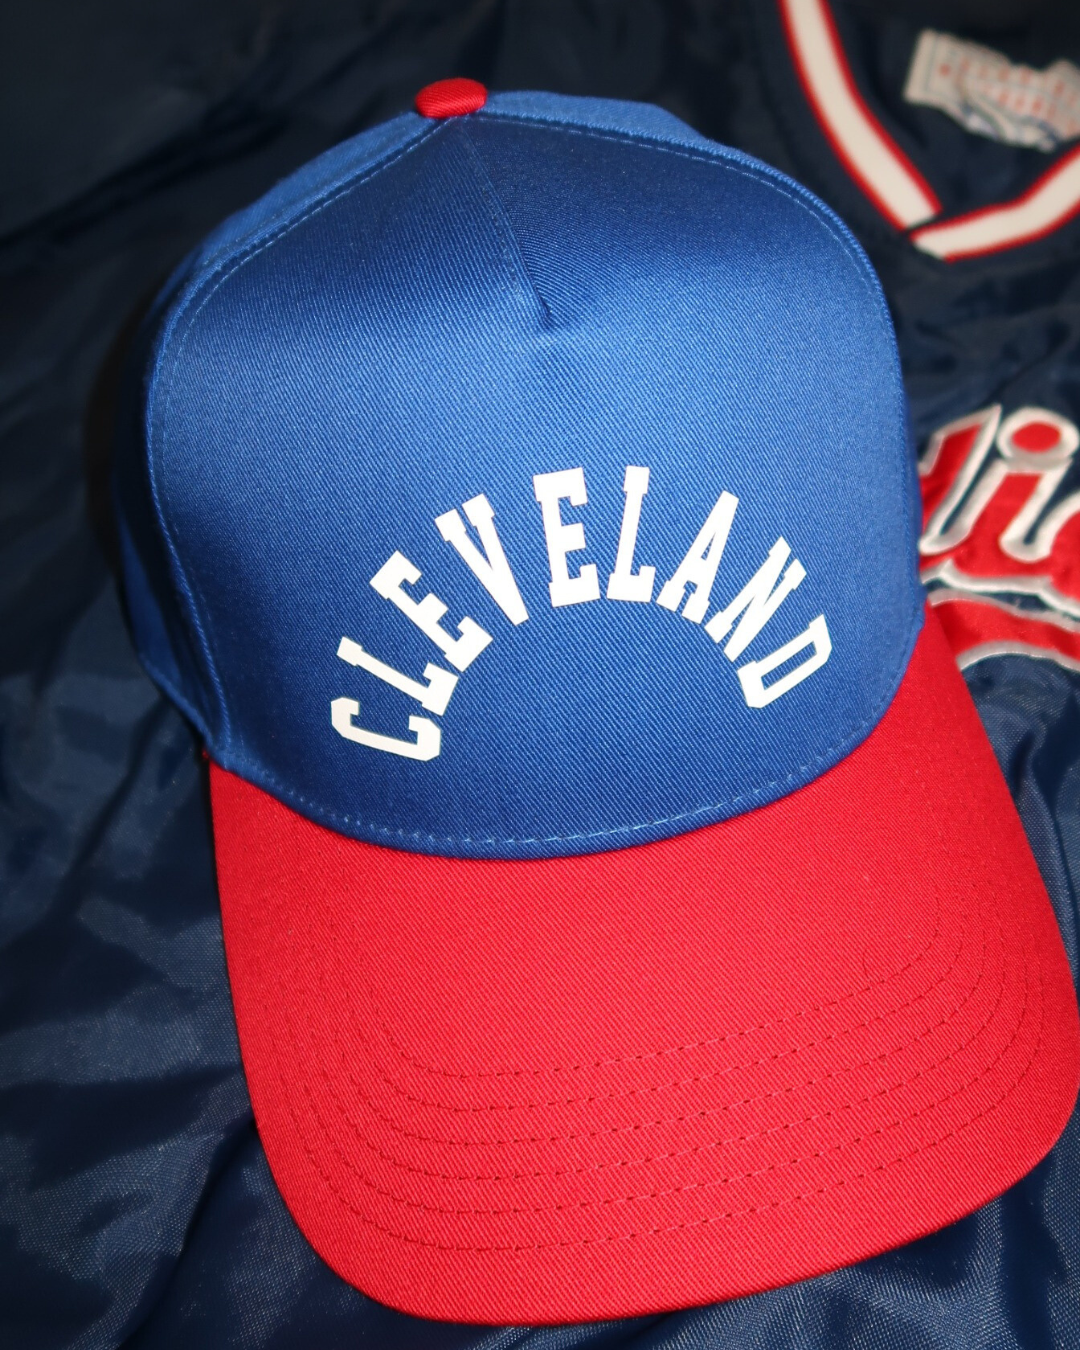 "CLEVELAND" Arch Two Tone Retro Hat